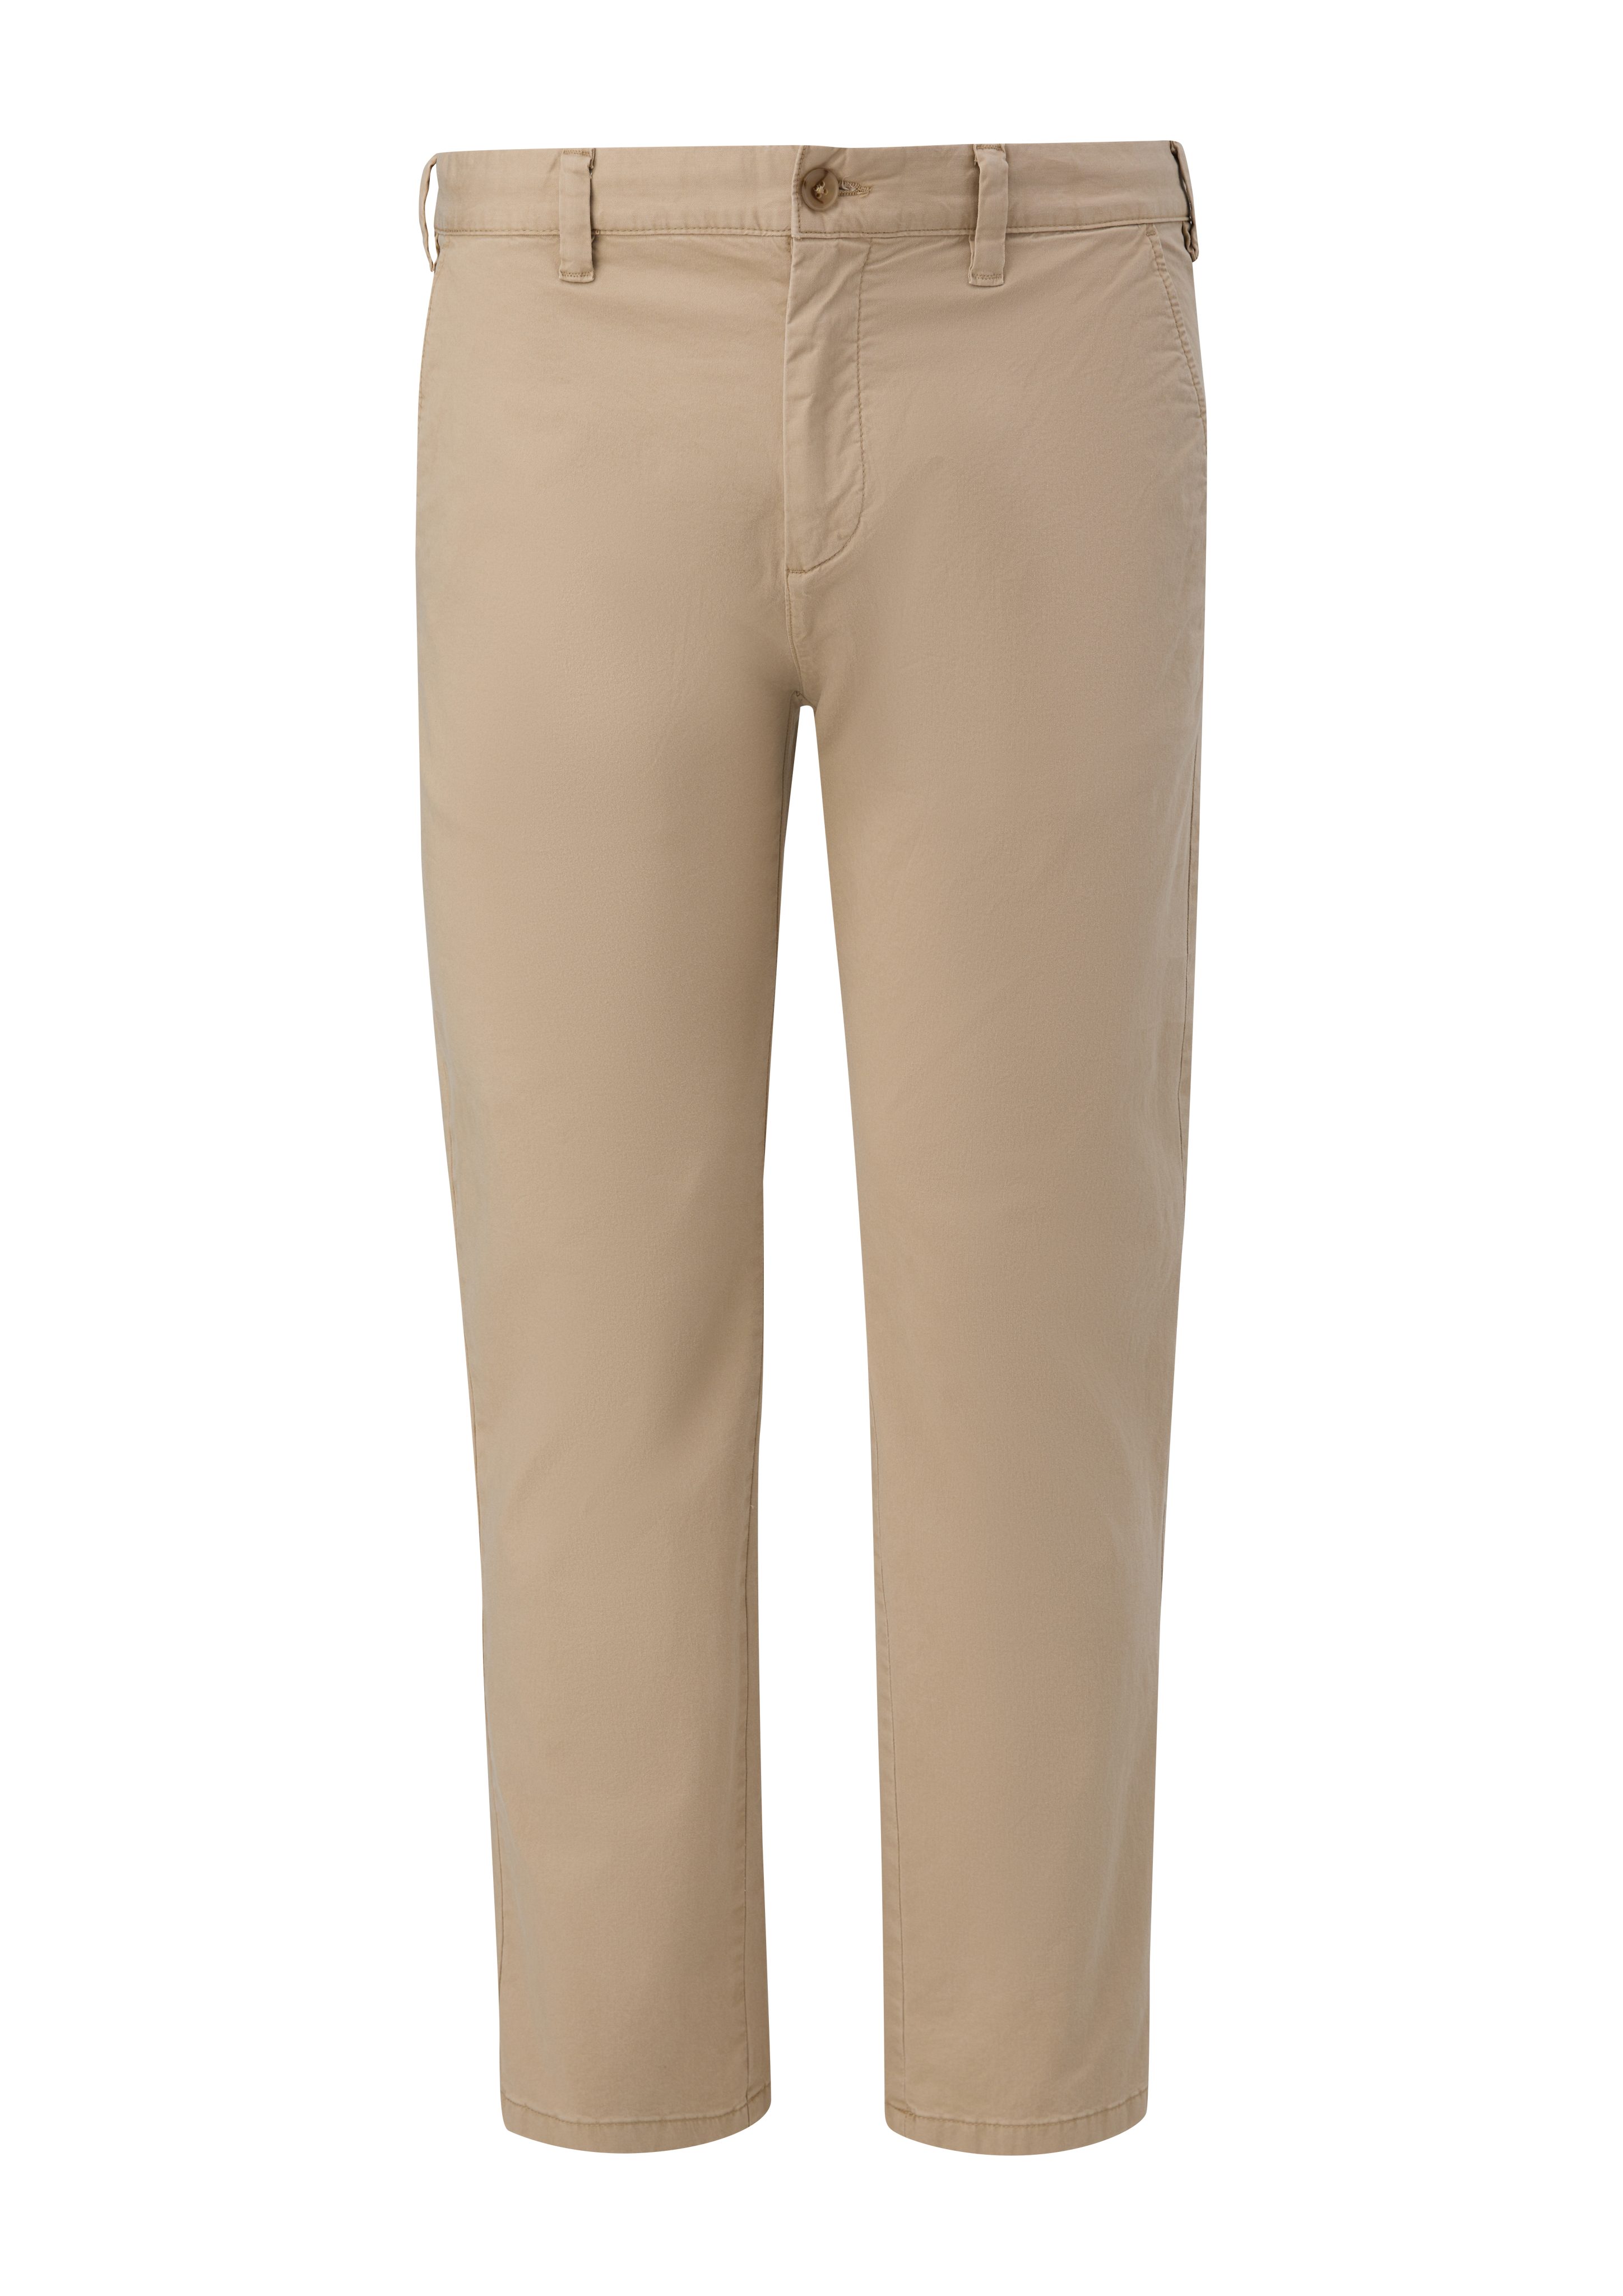 Detroit: im s.Oliver beige Fit Relaxed Chino Stoffhose